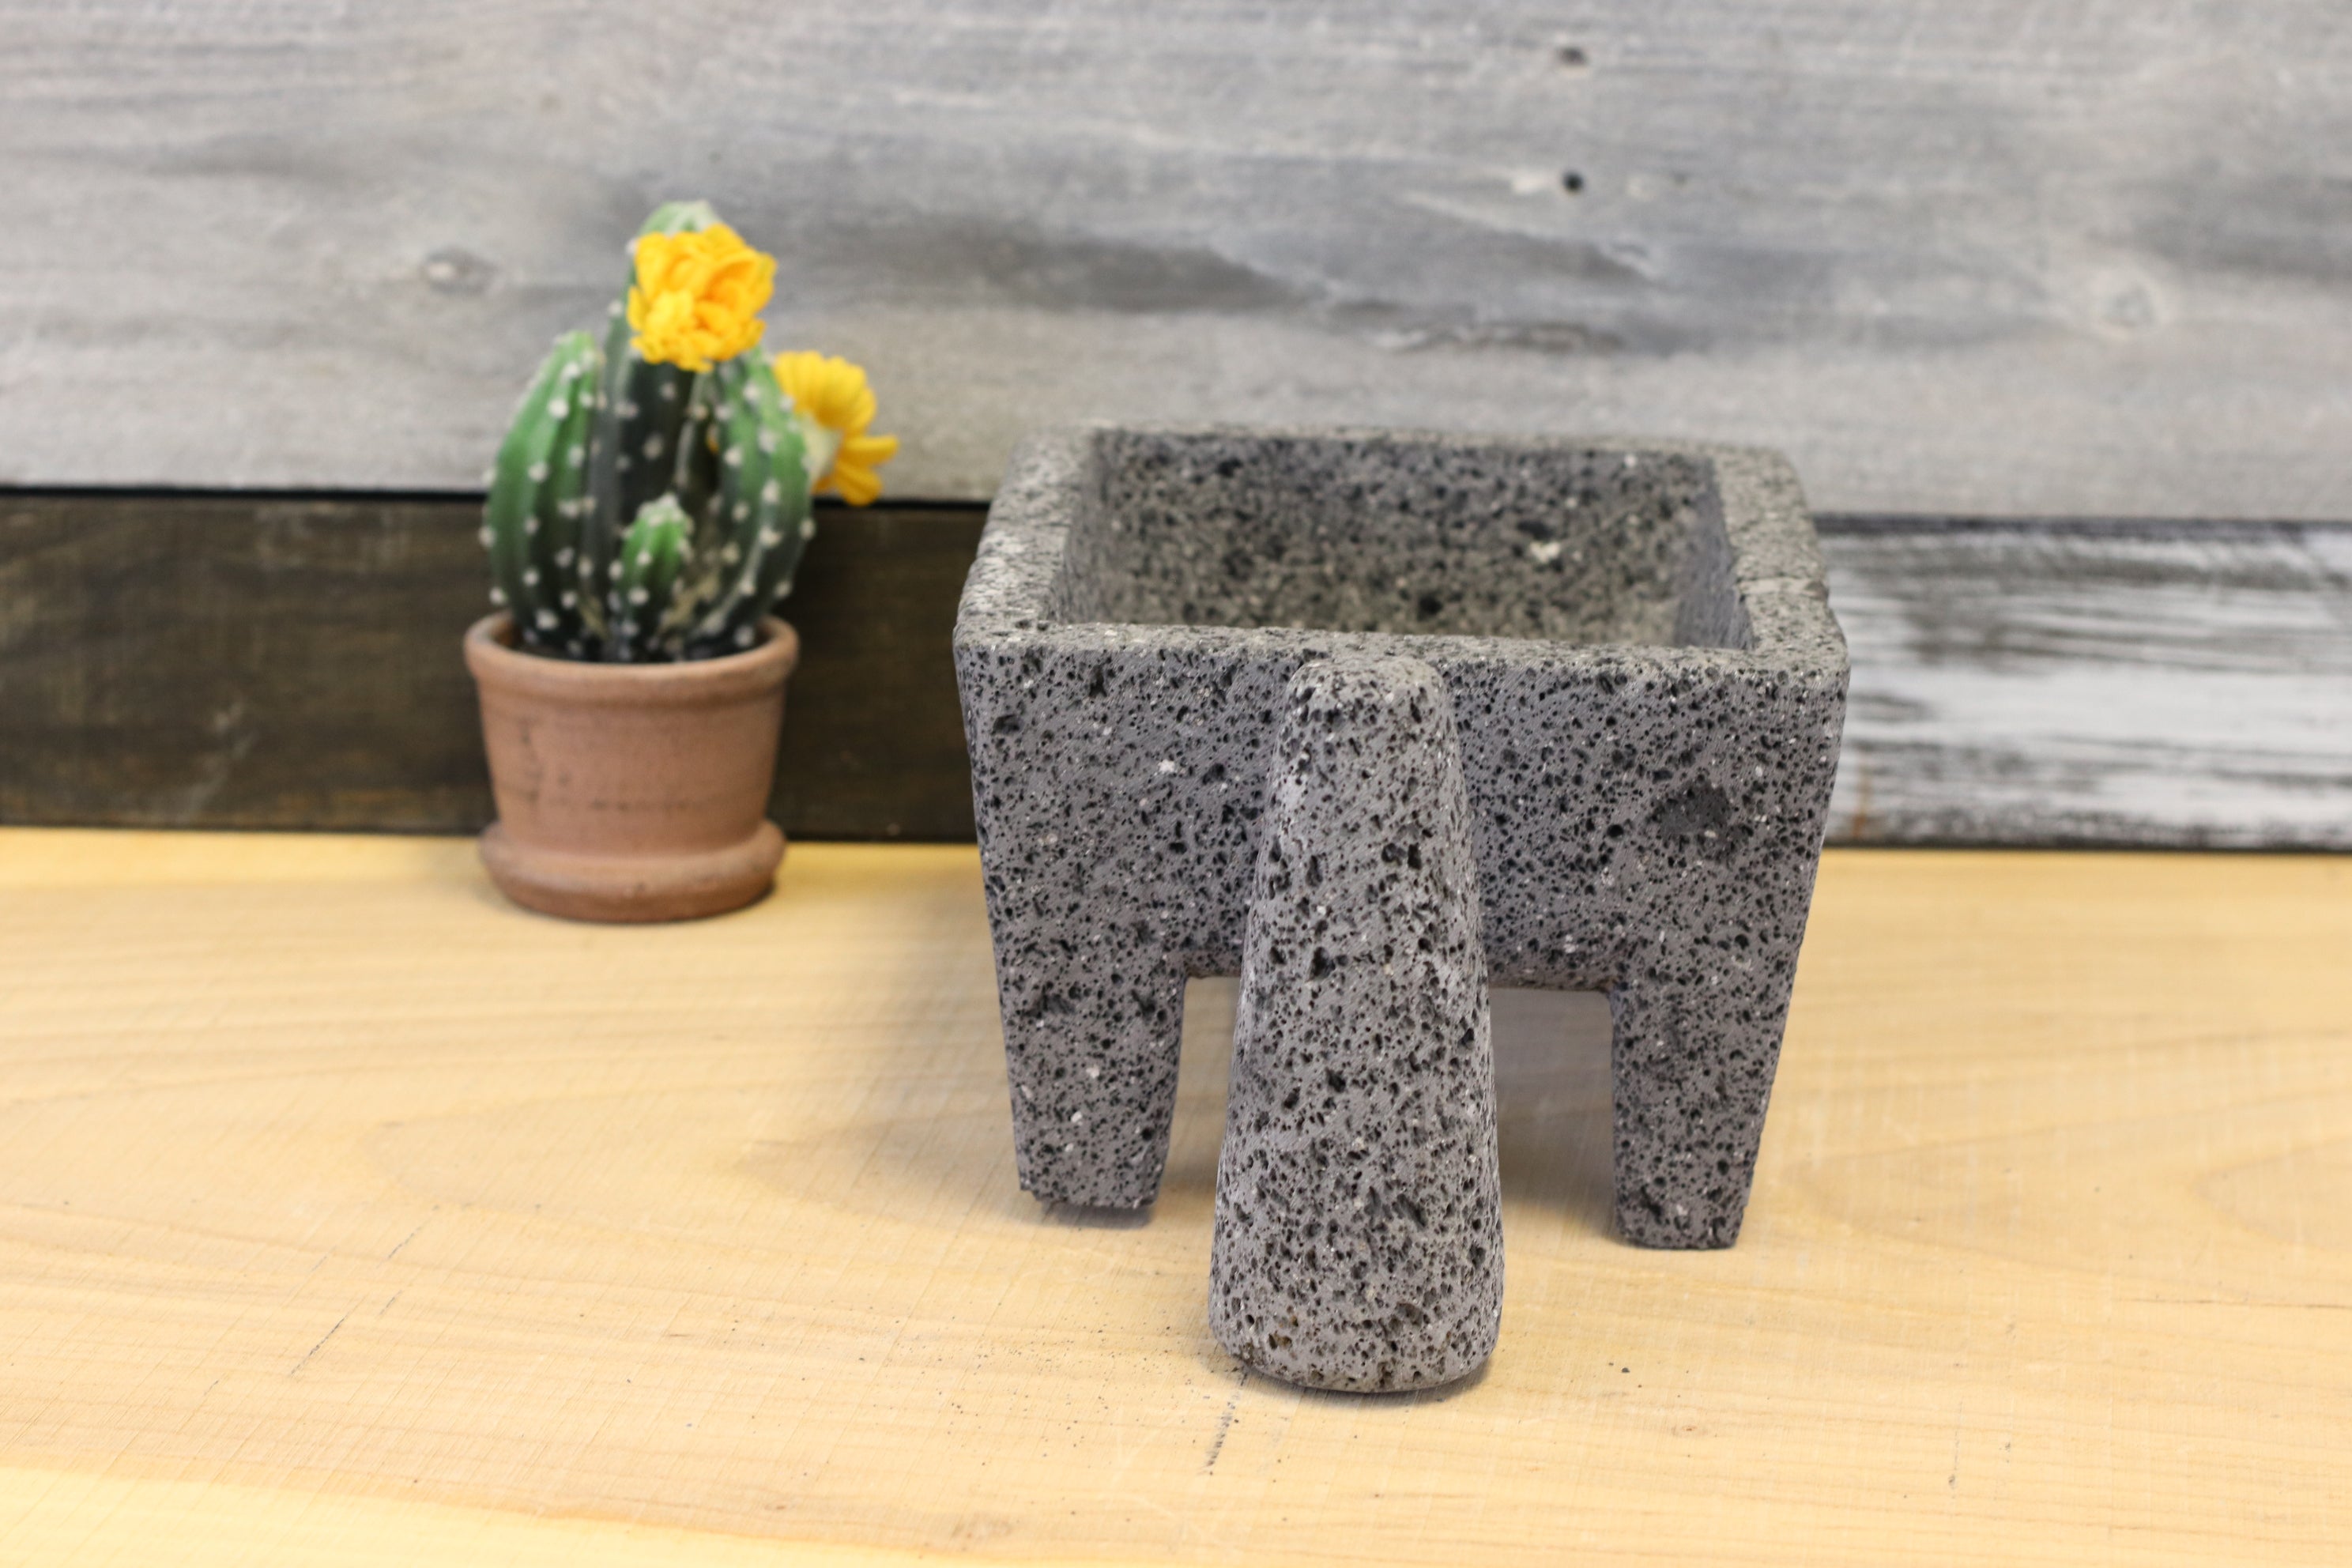 9-inch Rectangular Molcajete made from Volcanic Lava Rock. Handmade in Mexico using traditional techniques. We hand finish, package, and ship from the USA. Buy now at www.felipeandgrace.com. 